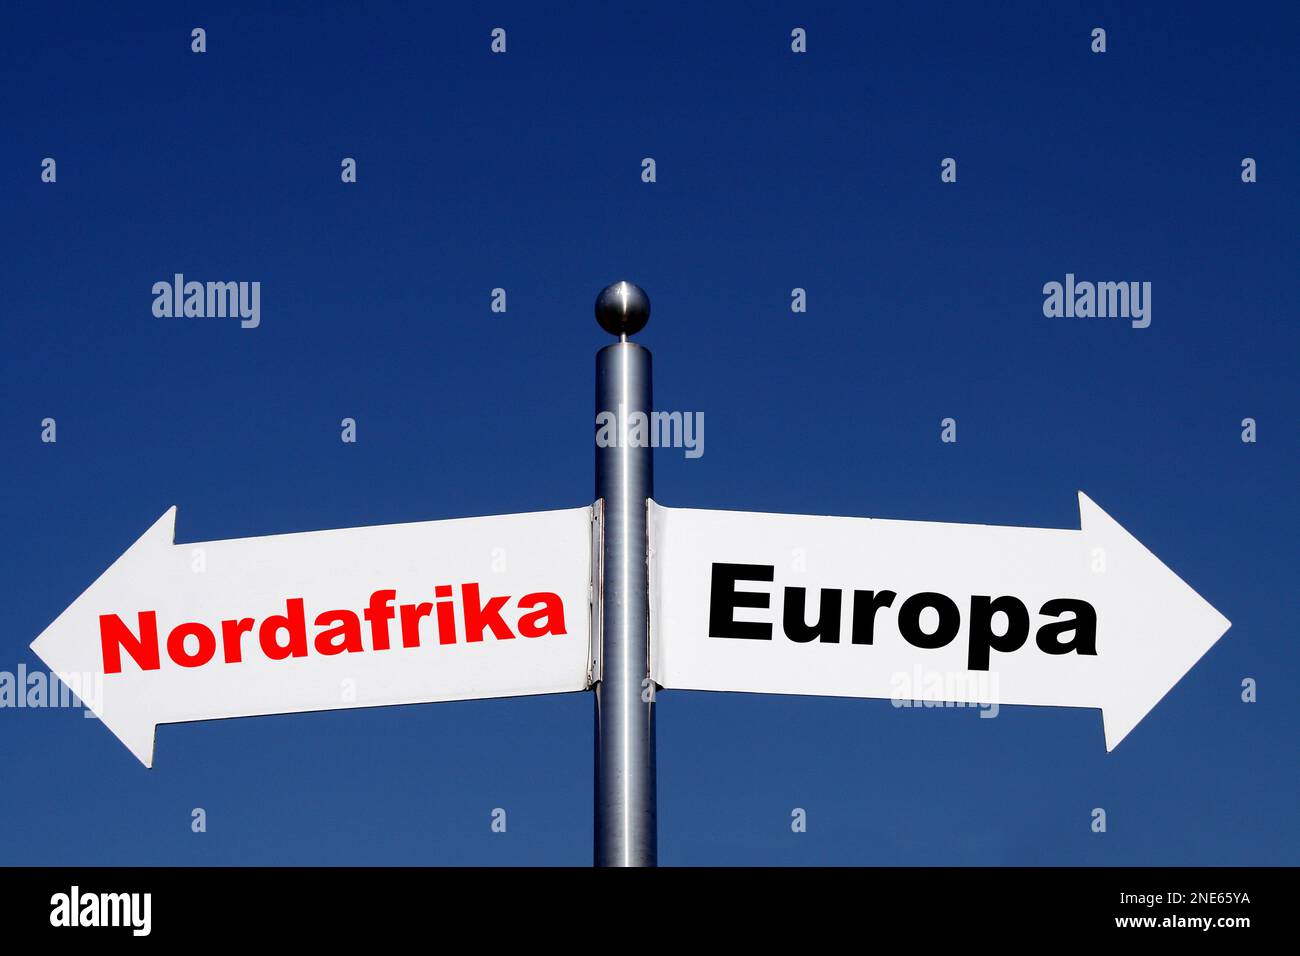 signposts pointing in different directions, options North Africa - Europa Stock Photo